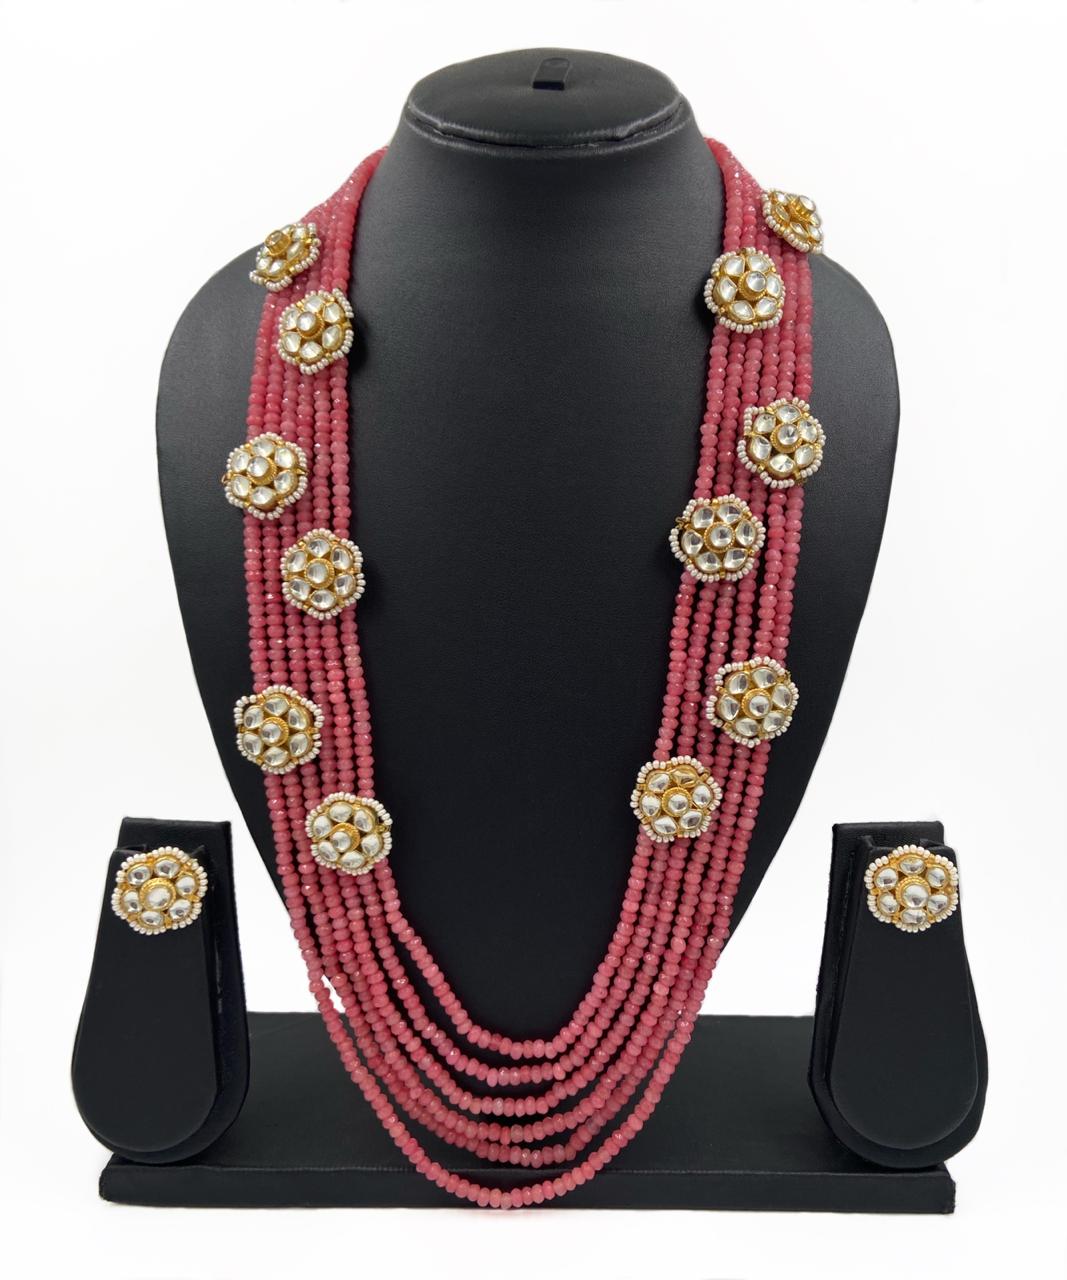 Designer Multilayered Peach Color Jade Beads Necklace Set By Gehna Shop Beads Jewellery